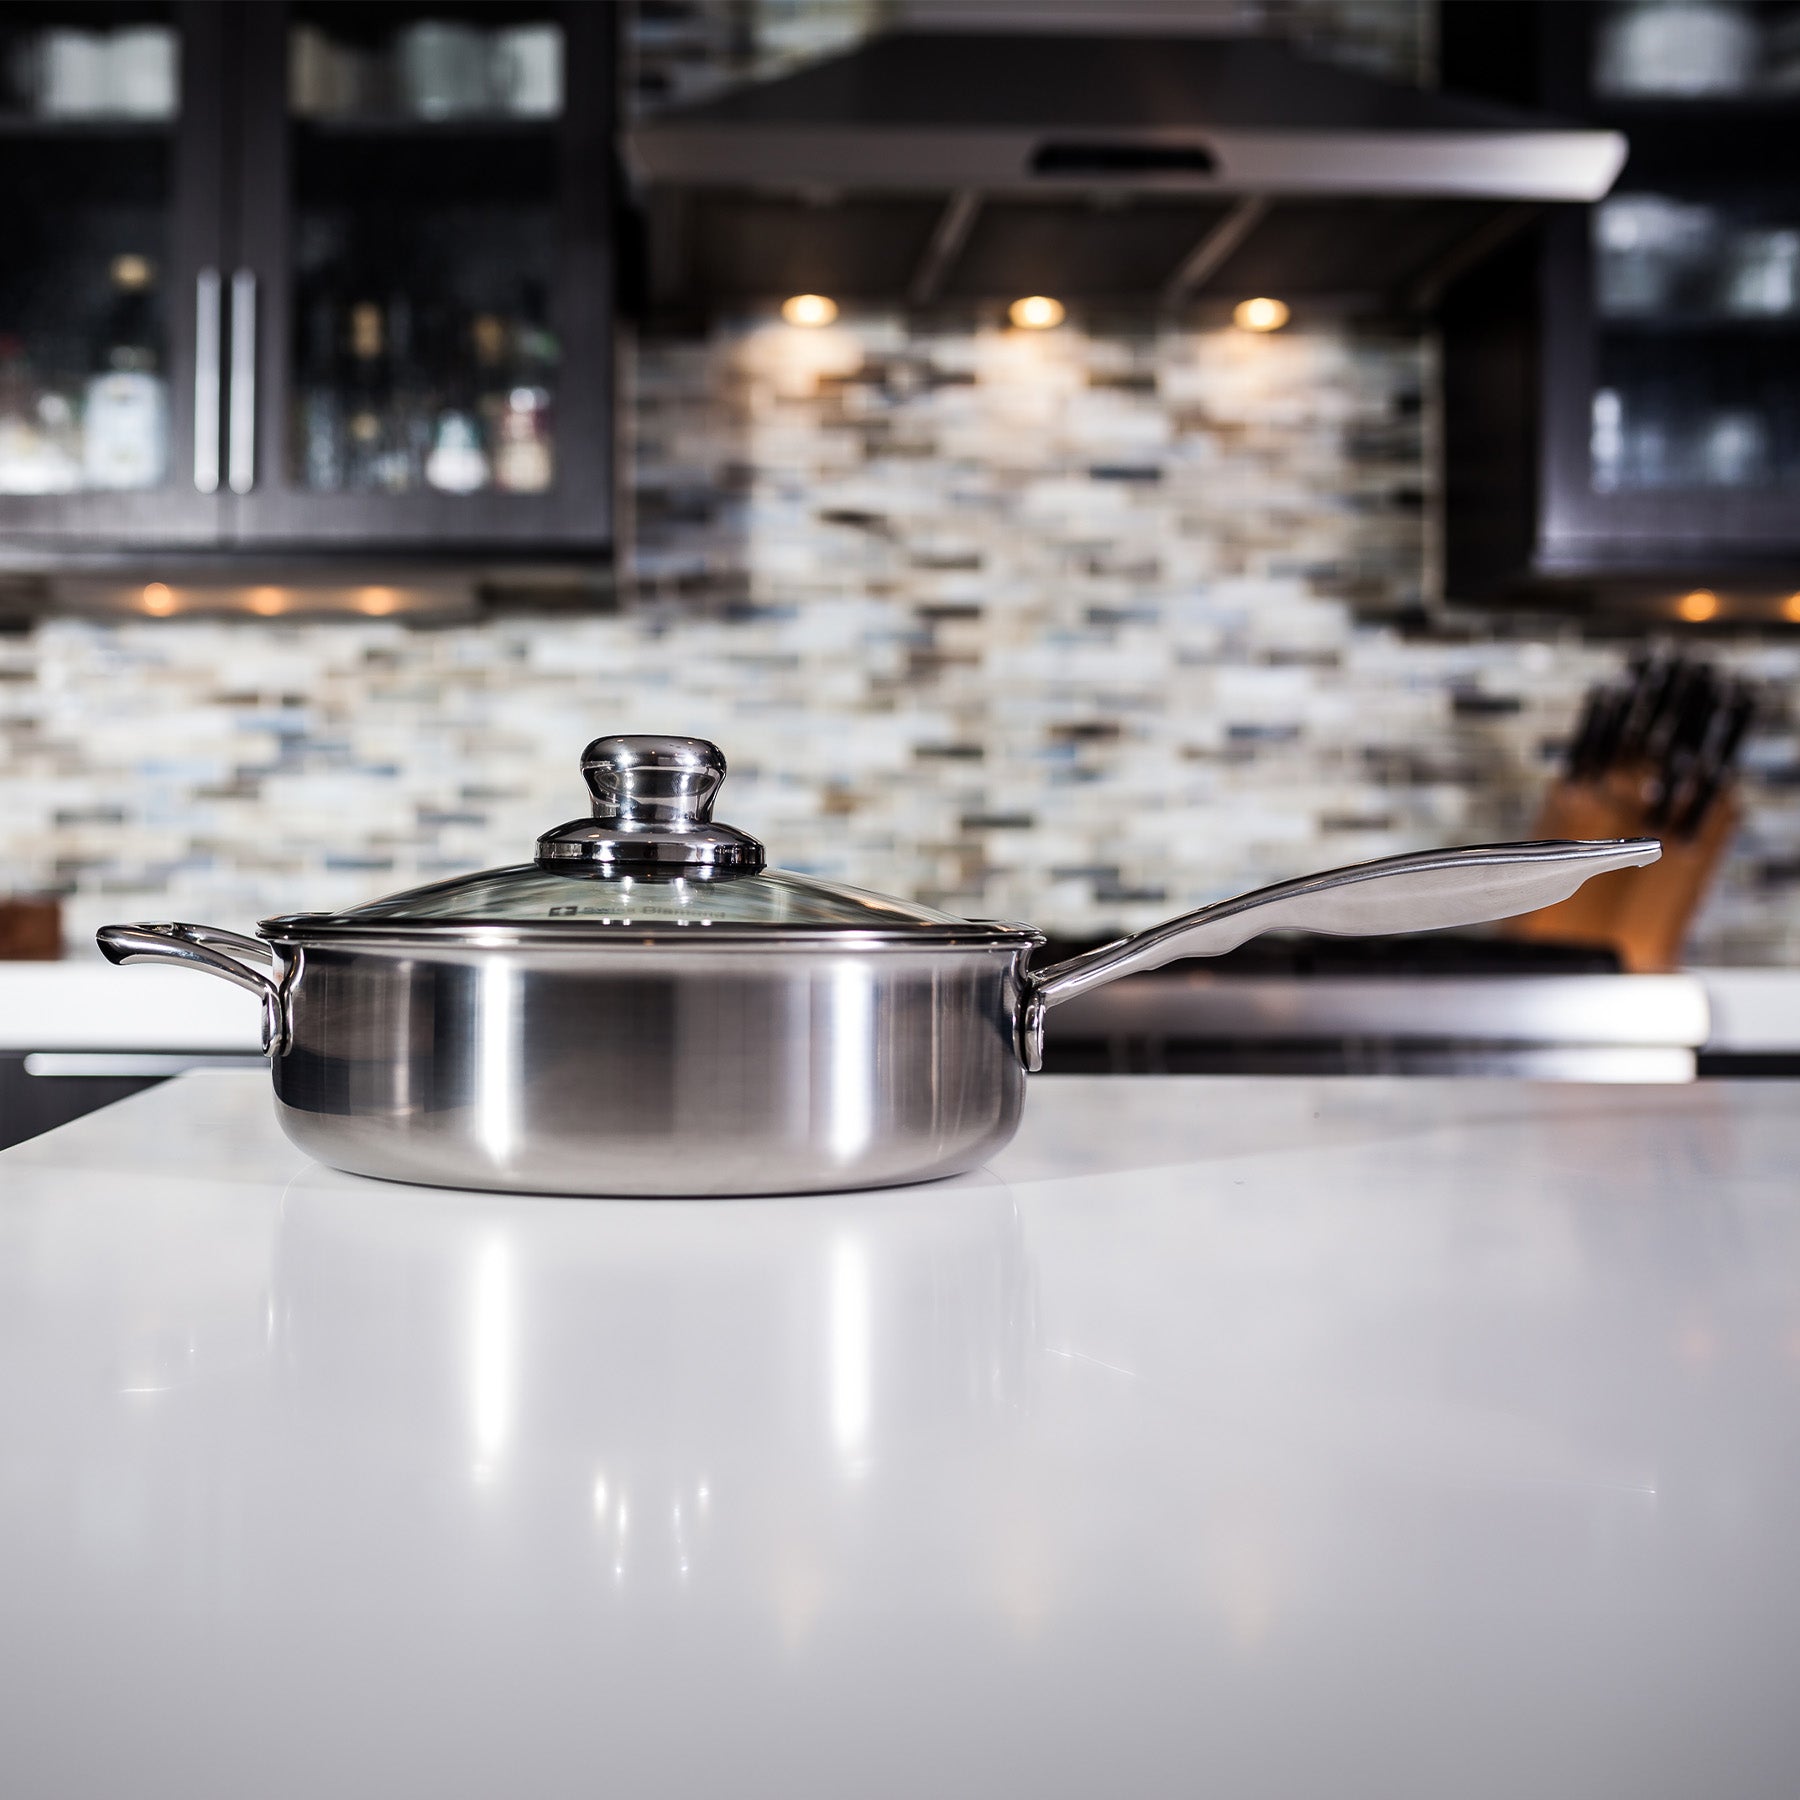 Premium Clad Saute Pan with Glass Lid - Induction in use on kitchen counter - side view